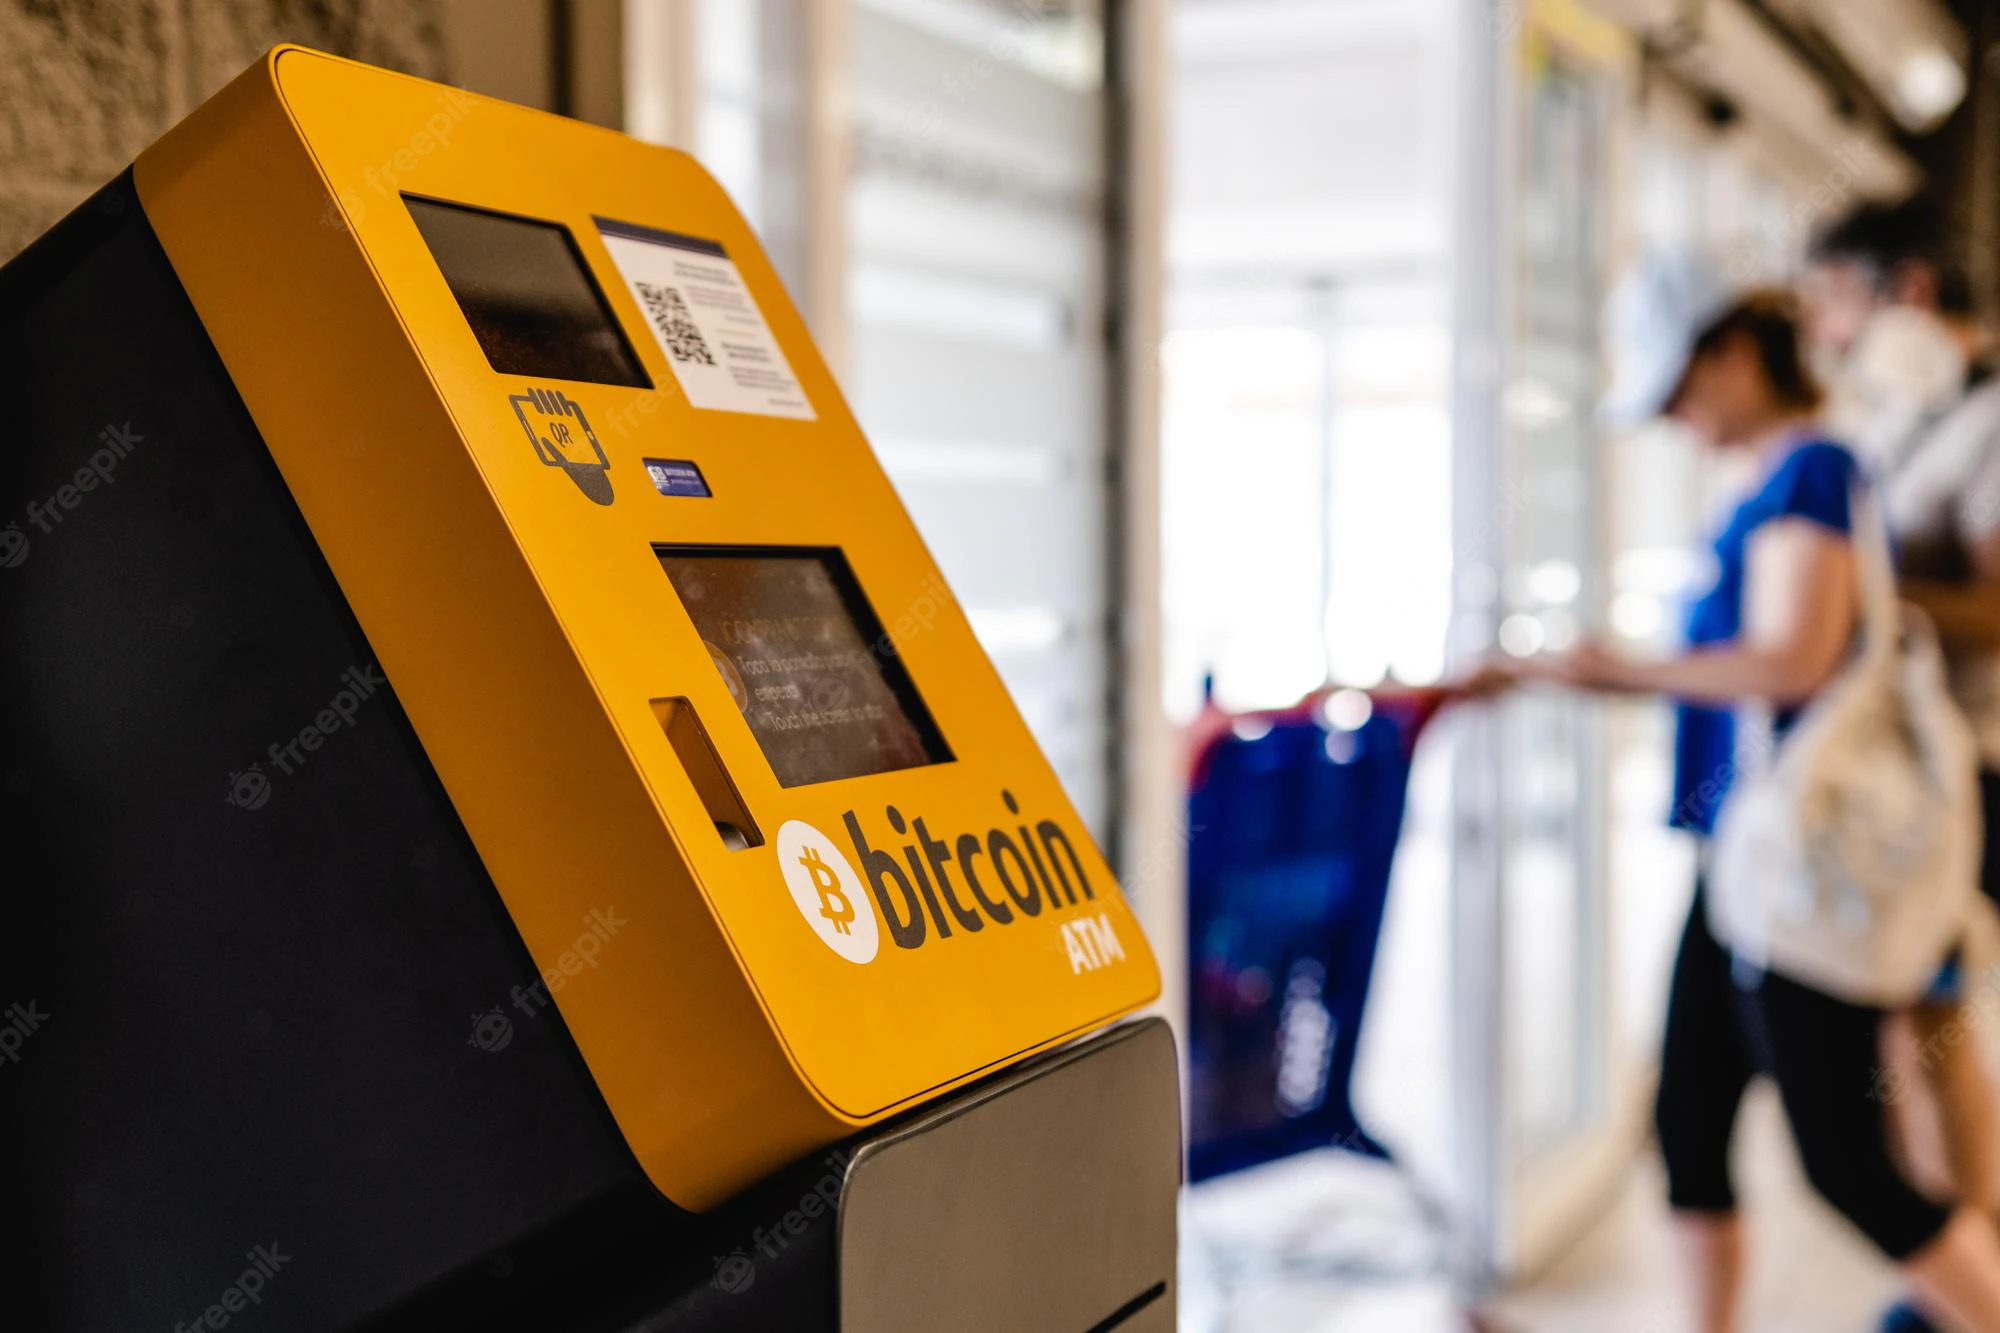 Australia Sets up First Lightning Network Enabled Bitcoin ATM